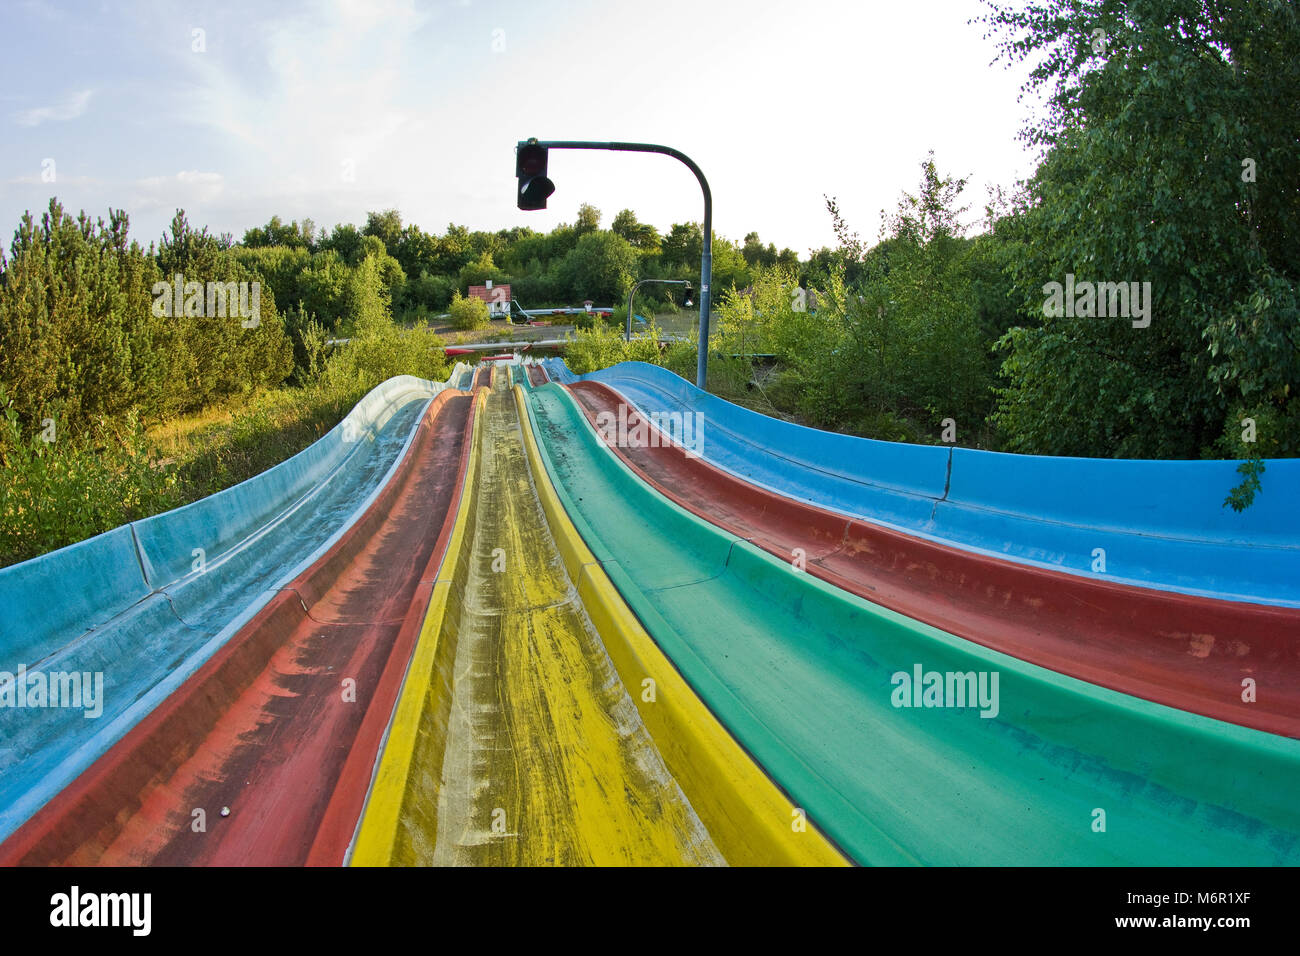 A picture from the Fun Park Fyn in Denmark. The abandoned fun park, where the attractions are wasted and unused. Stock Photo